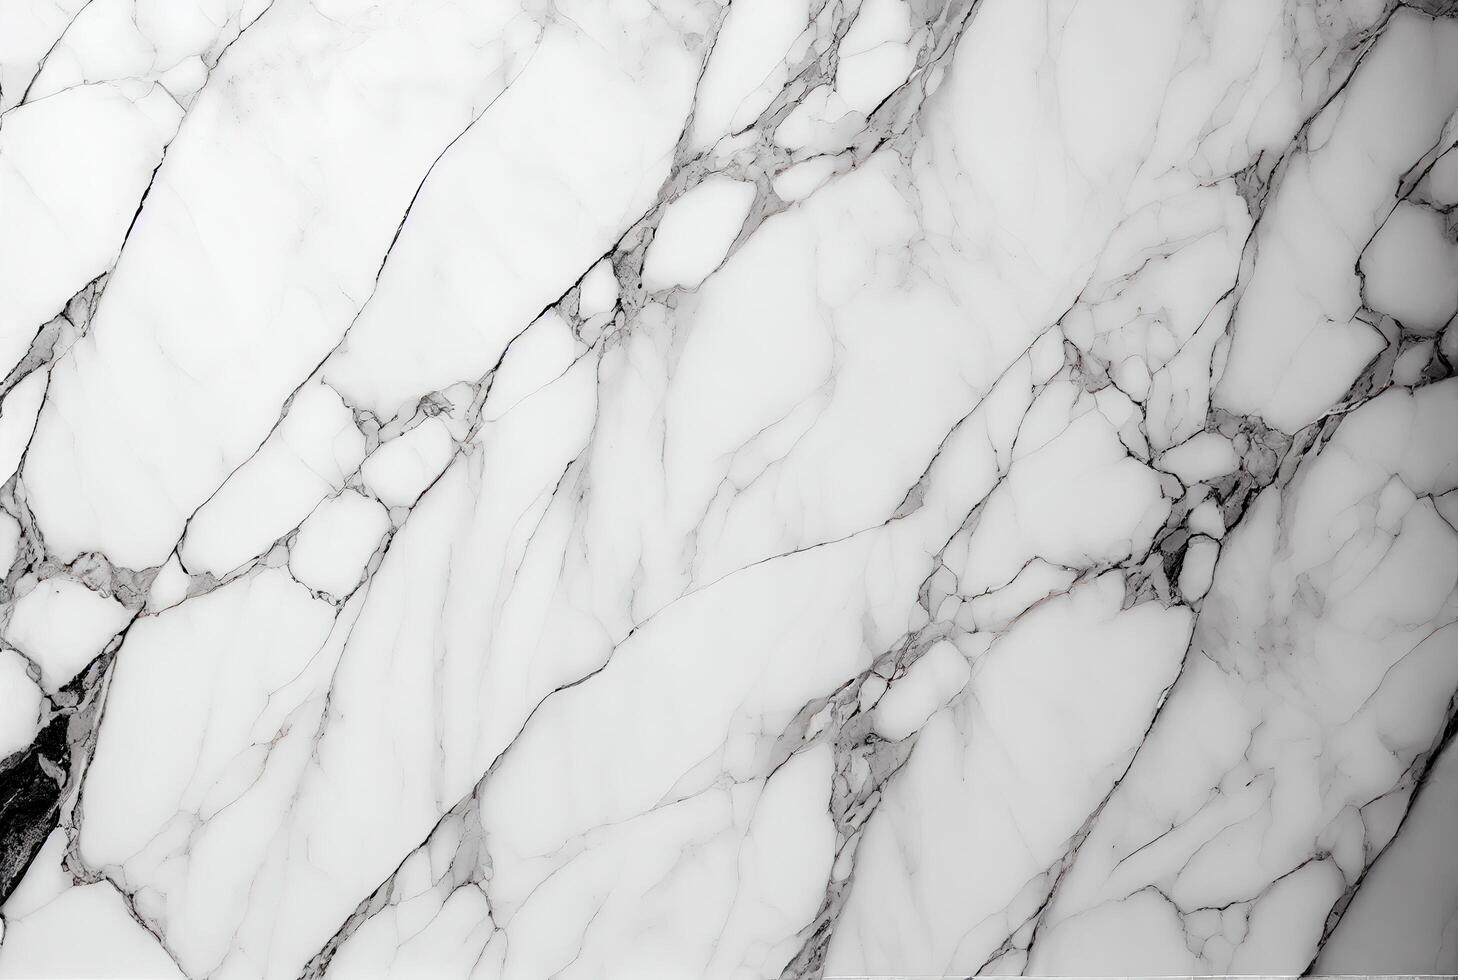 Marble white and gray slab. Abstract texture and light background. photo